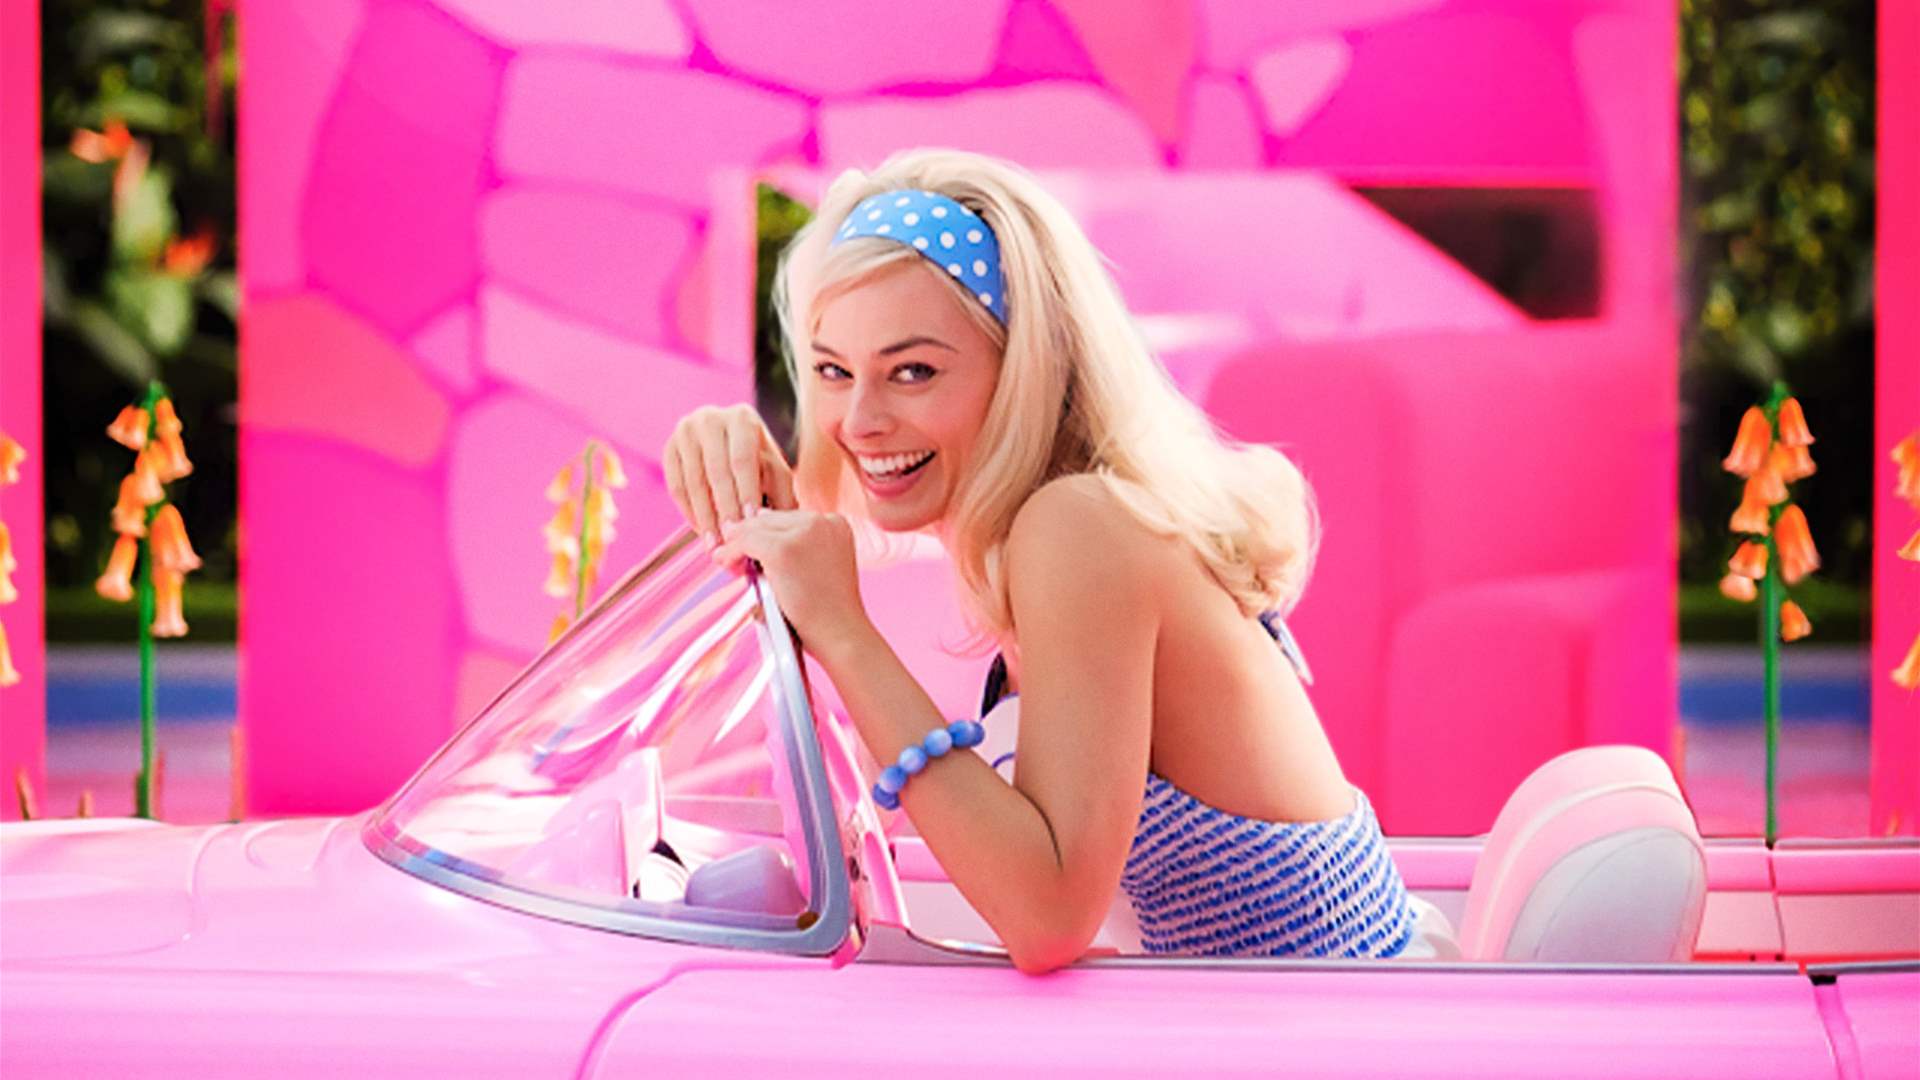 Lebanese Interior Minister has yet to decide on &quot;Barbie&quot; film release